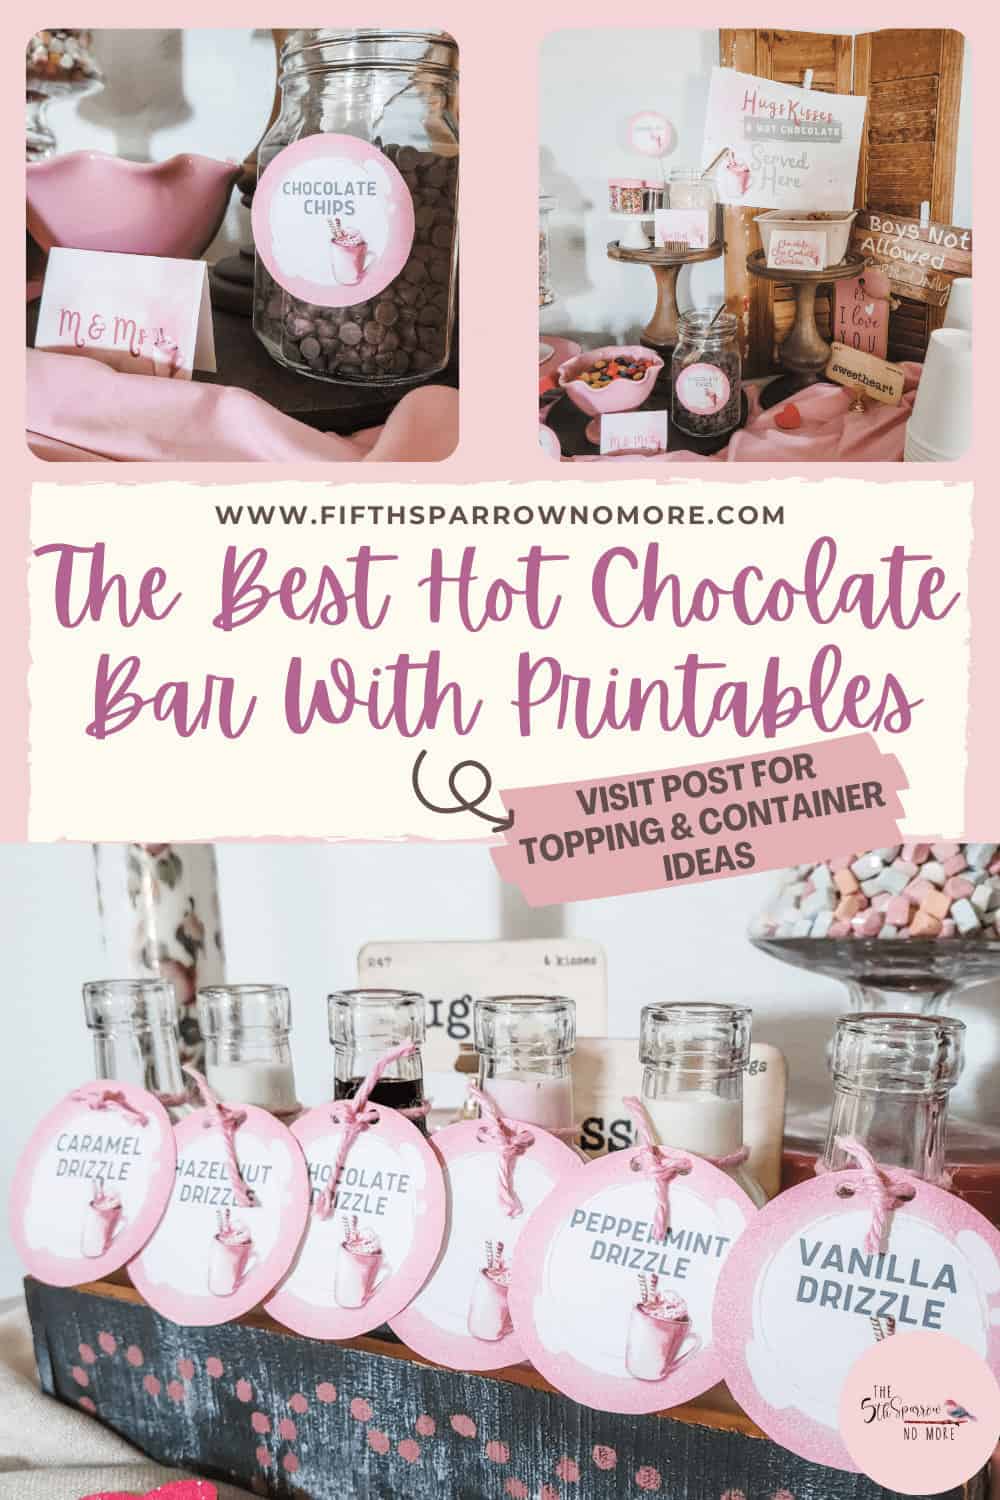 The best hot chocolate bar with printables.